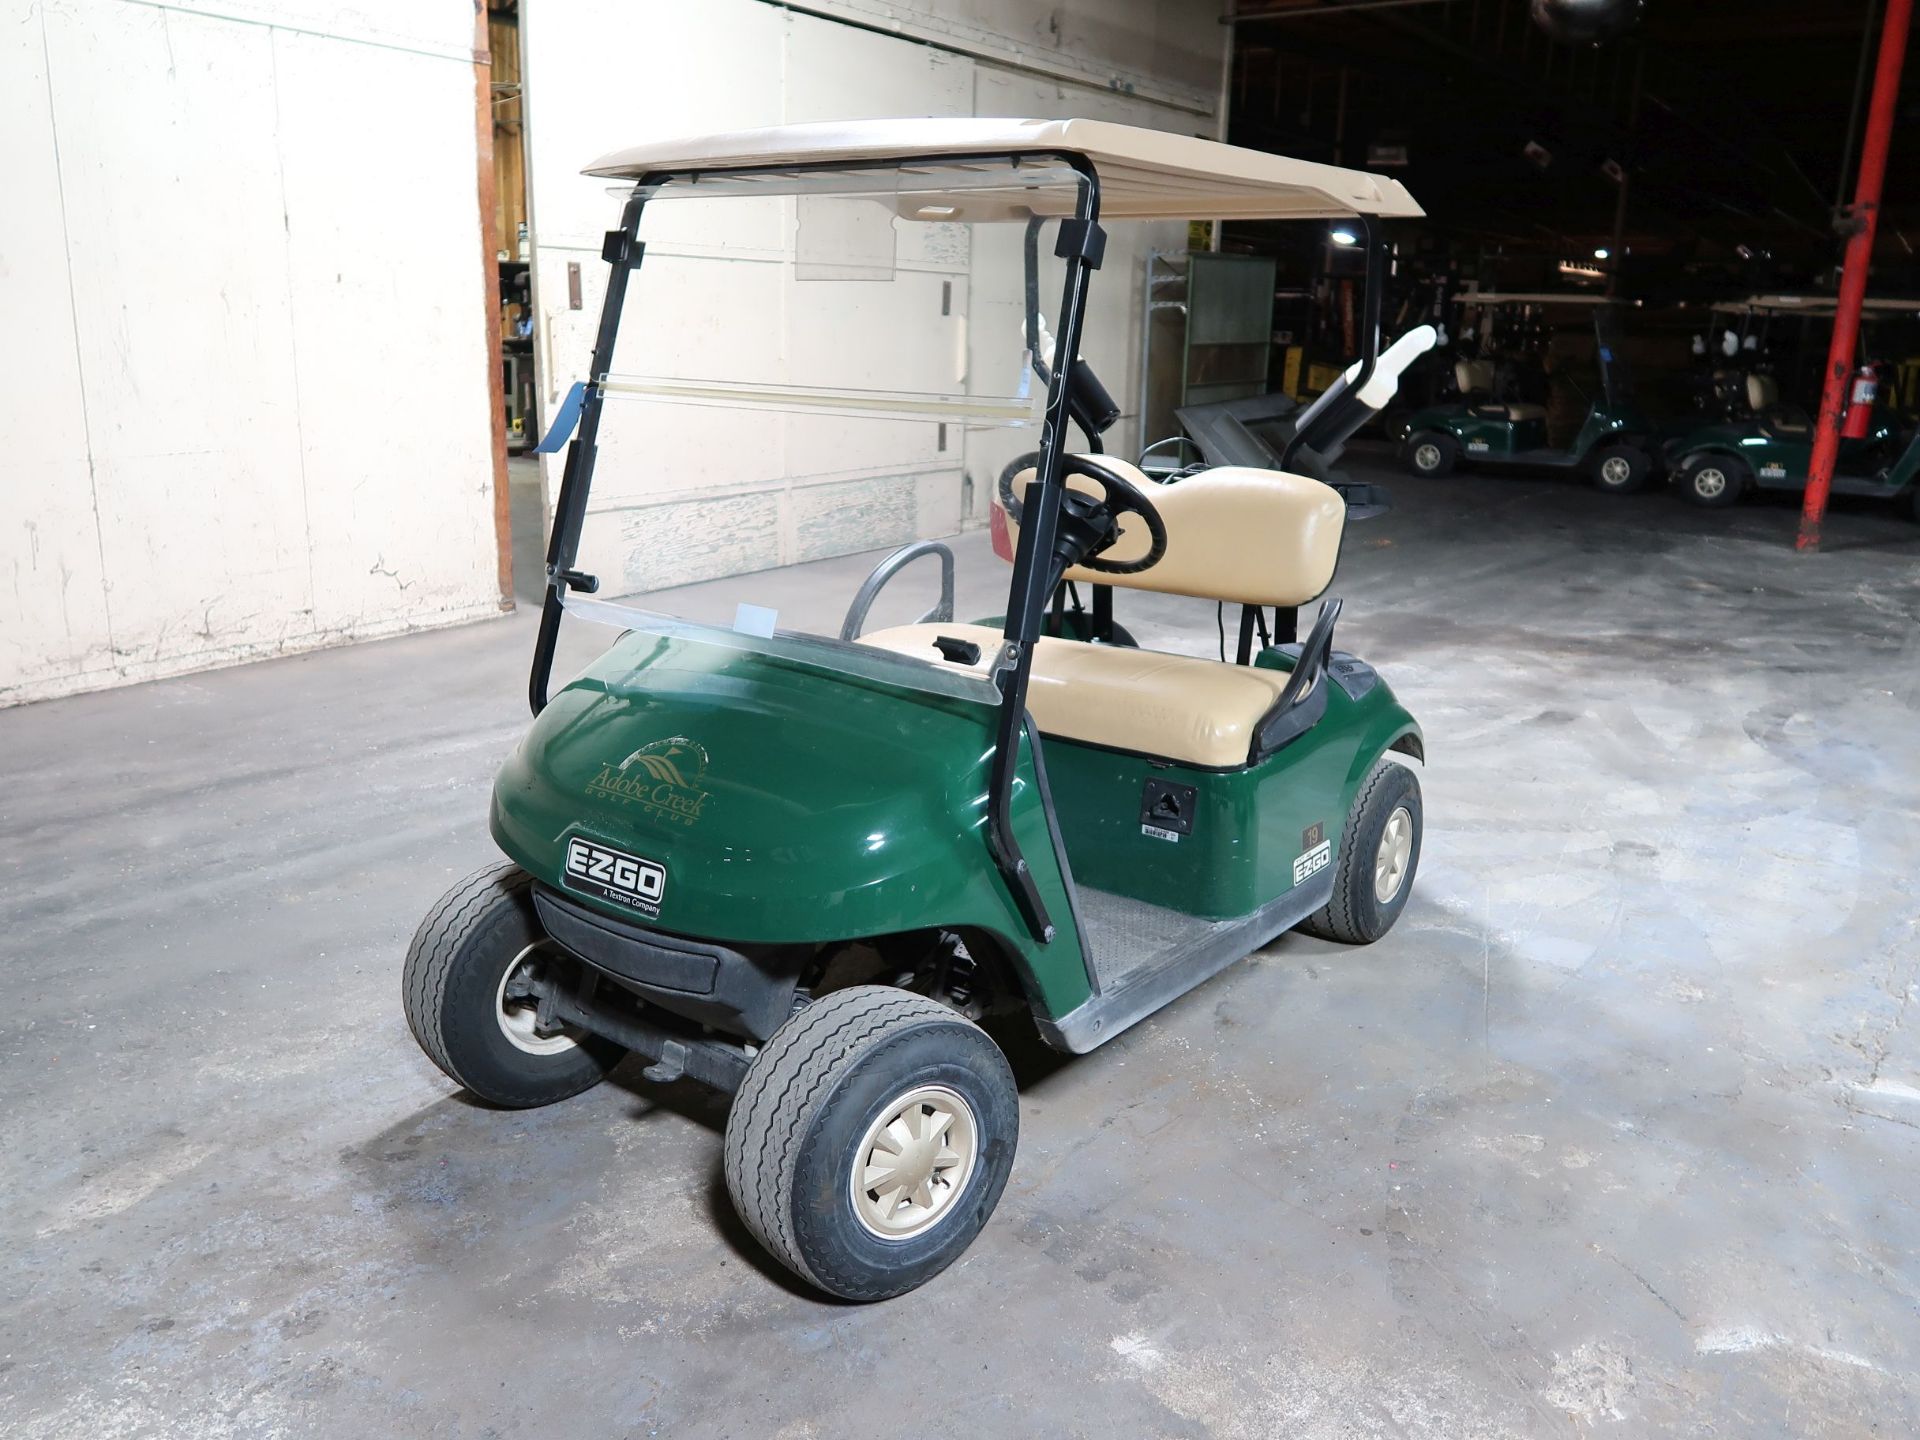 EZ-GO ELECTRIC GOLF CART WITH CHARGER, 48 VOLT - Image 7 of 10